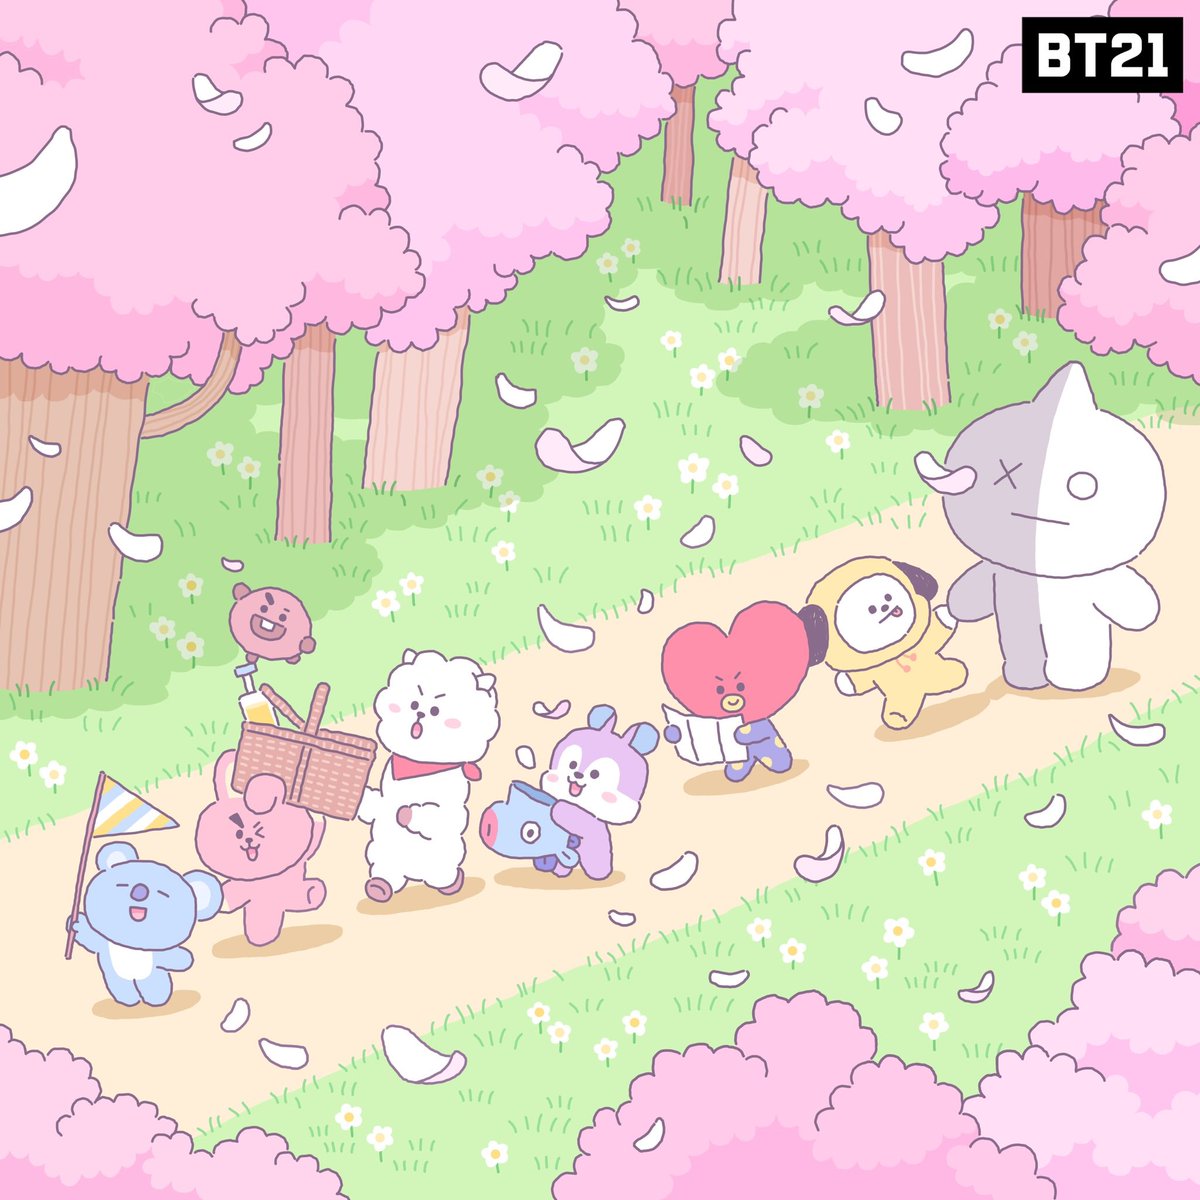 Spring has come to BT21🌸
Let's go on a cherry blossom picnic UNISTARS!

#BT21 #UNISTARS #Spring #Blossom #Picnic #SpringVibes